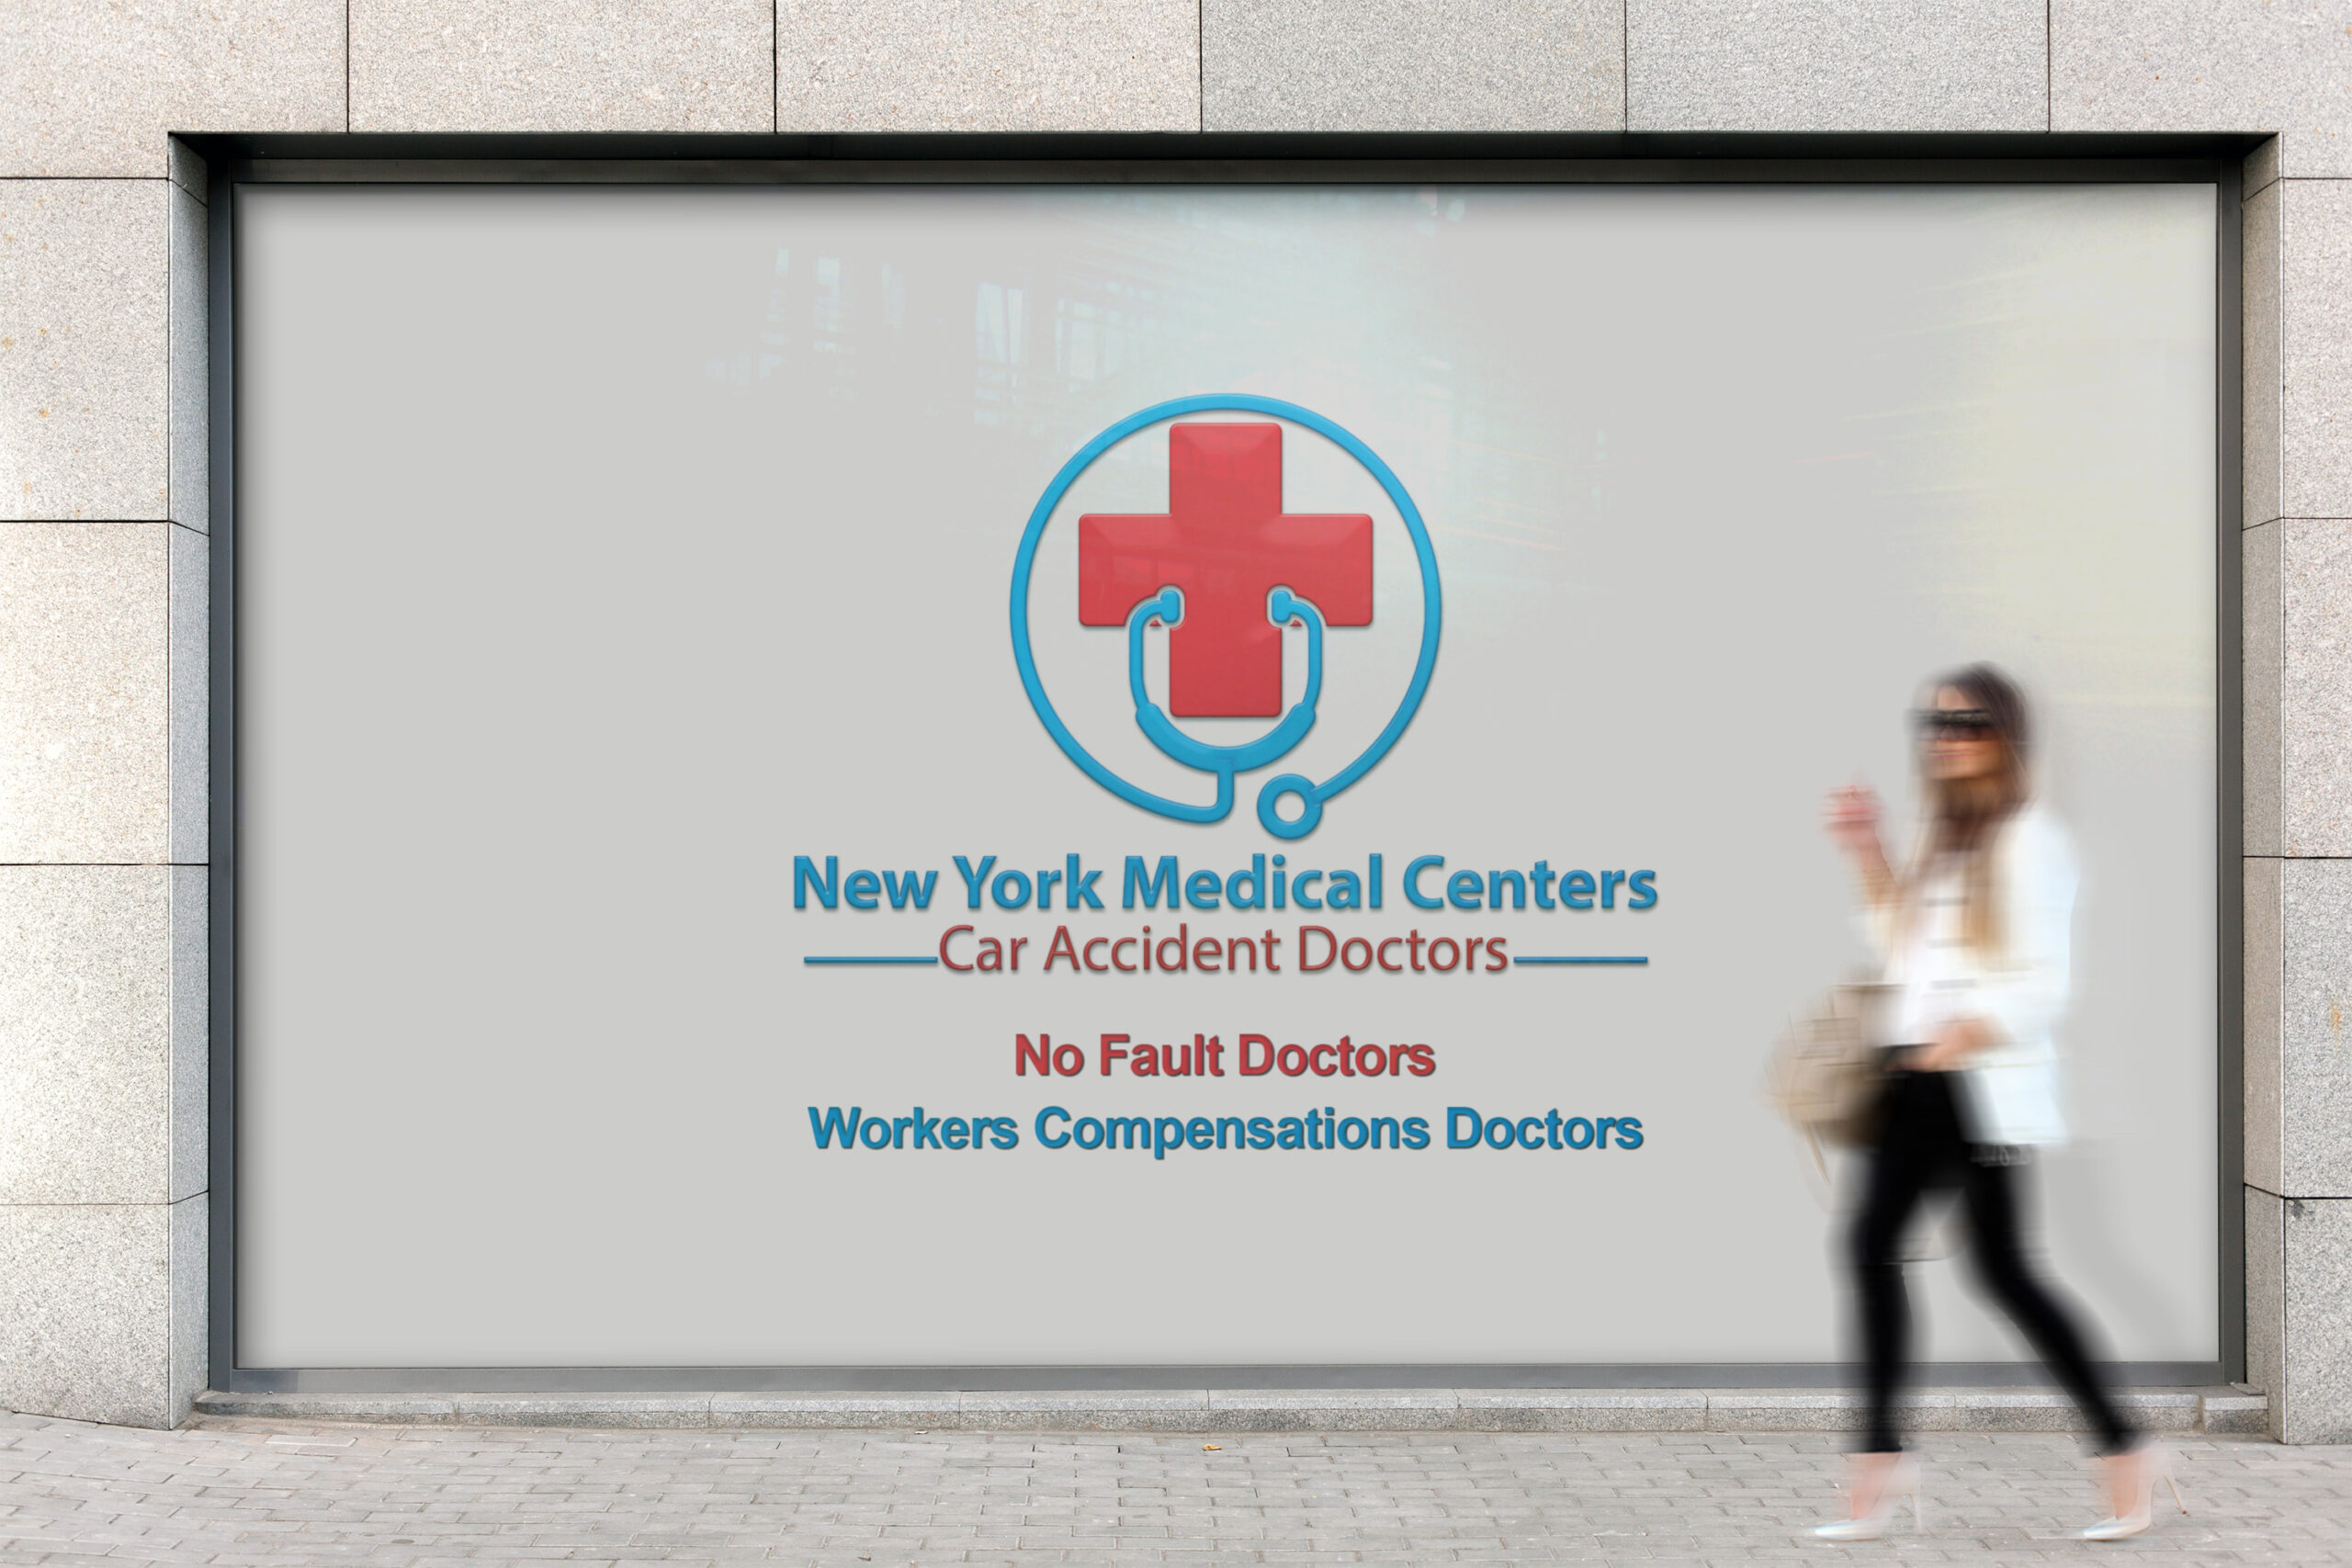 New York Medical Center –<br />
Staten Island No Fault Doctor – Workers Compensation Doctor<br />
24 Bradley Staten Island, NY 10314<br />
718-475-6859